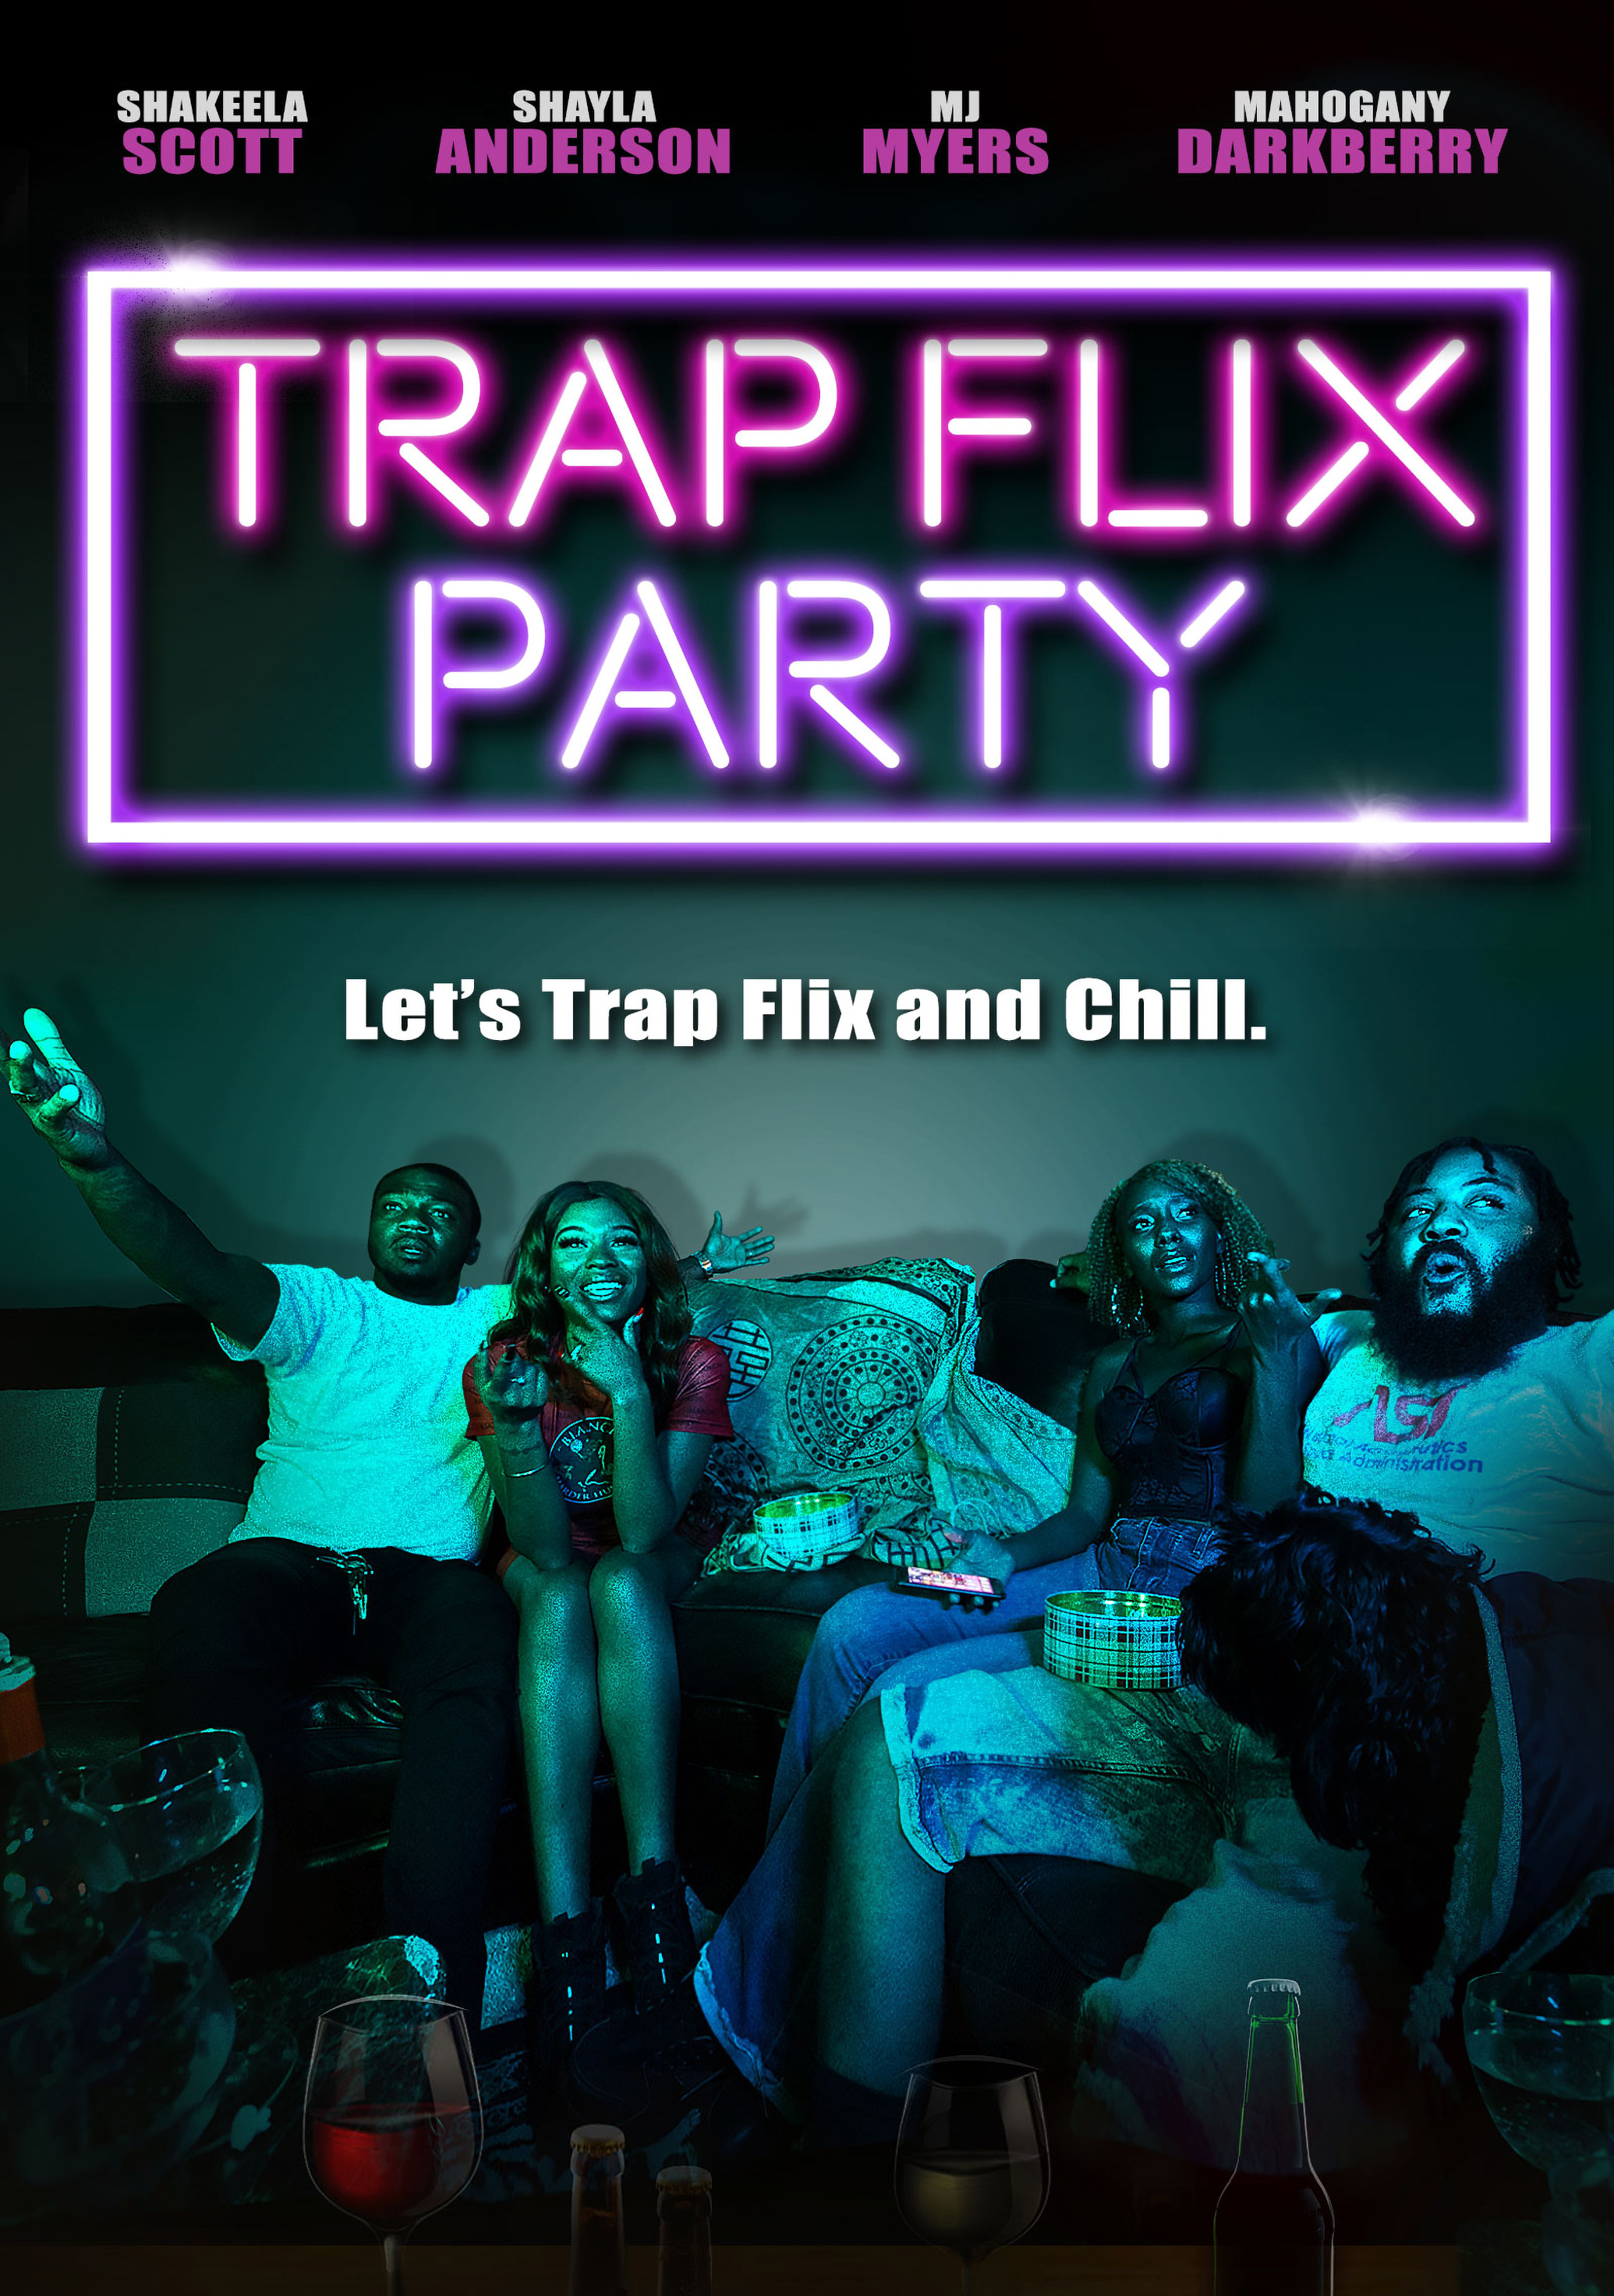 Movie Poster for Trap Flix Party